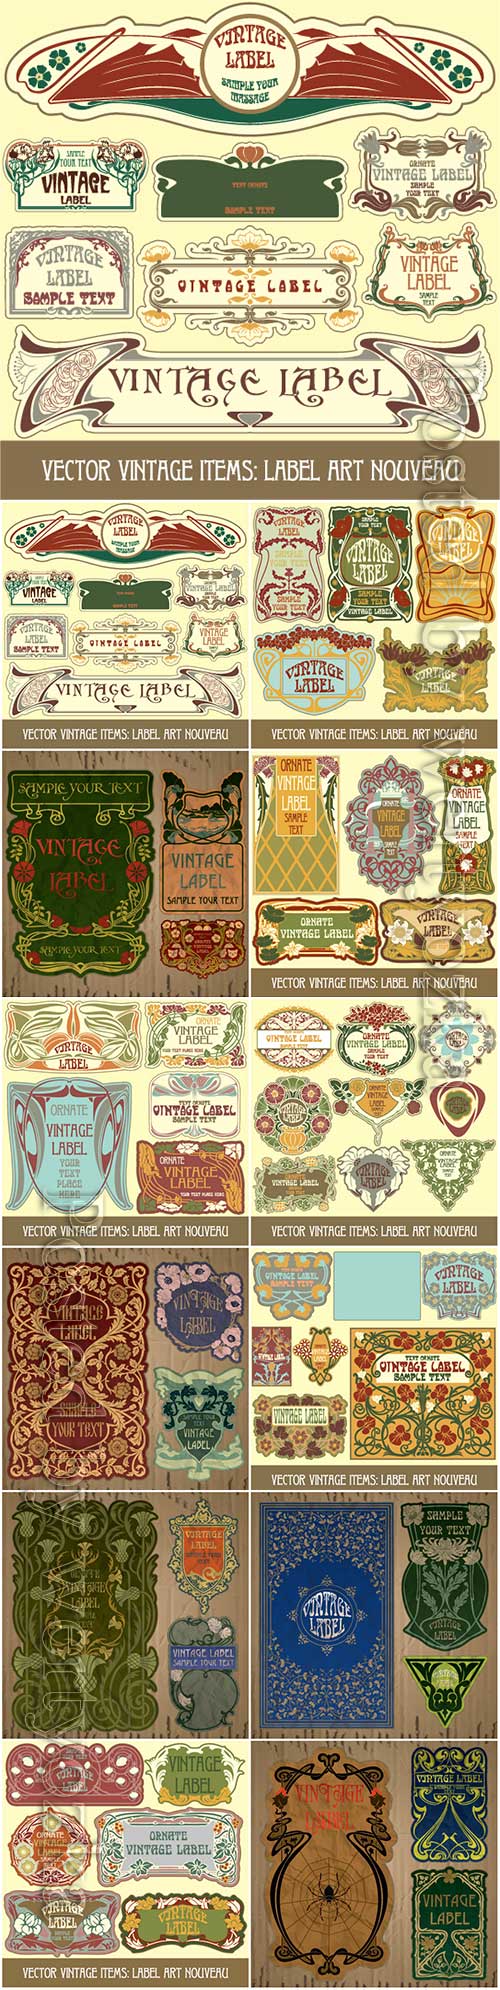 Vintage labels in vector, ornaments and logos # 5